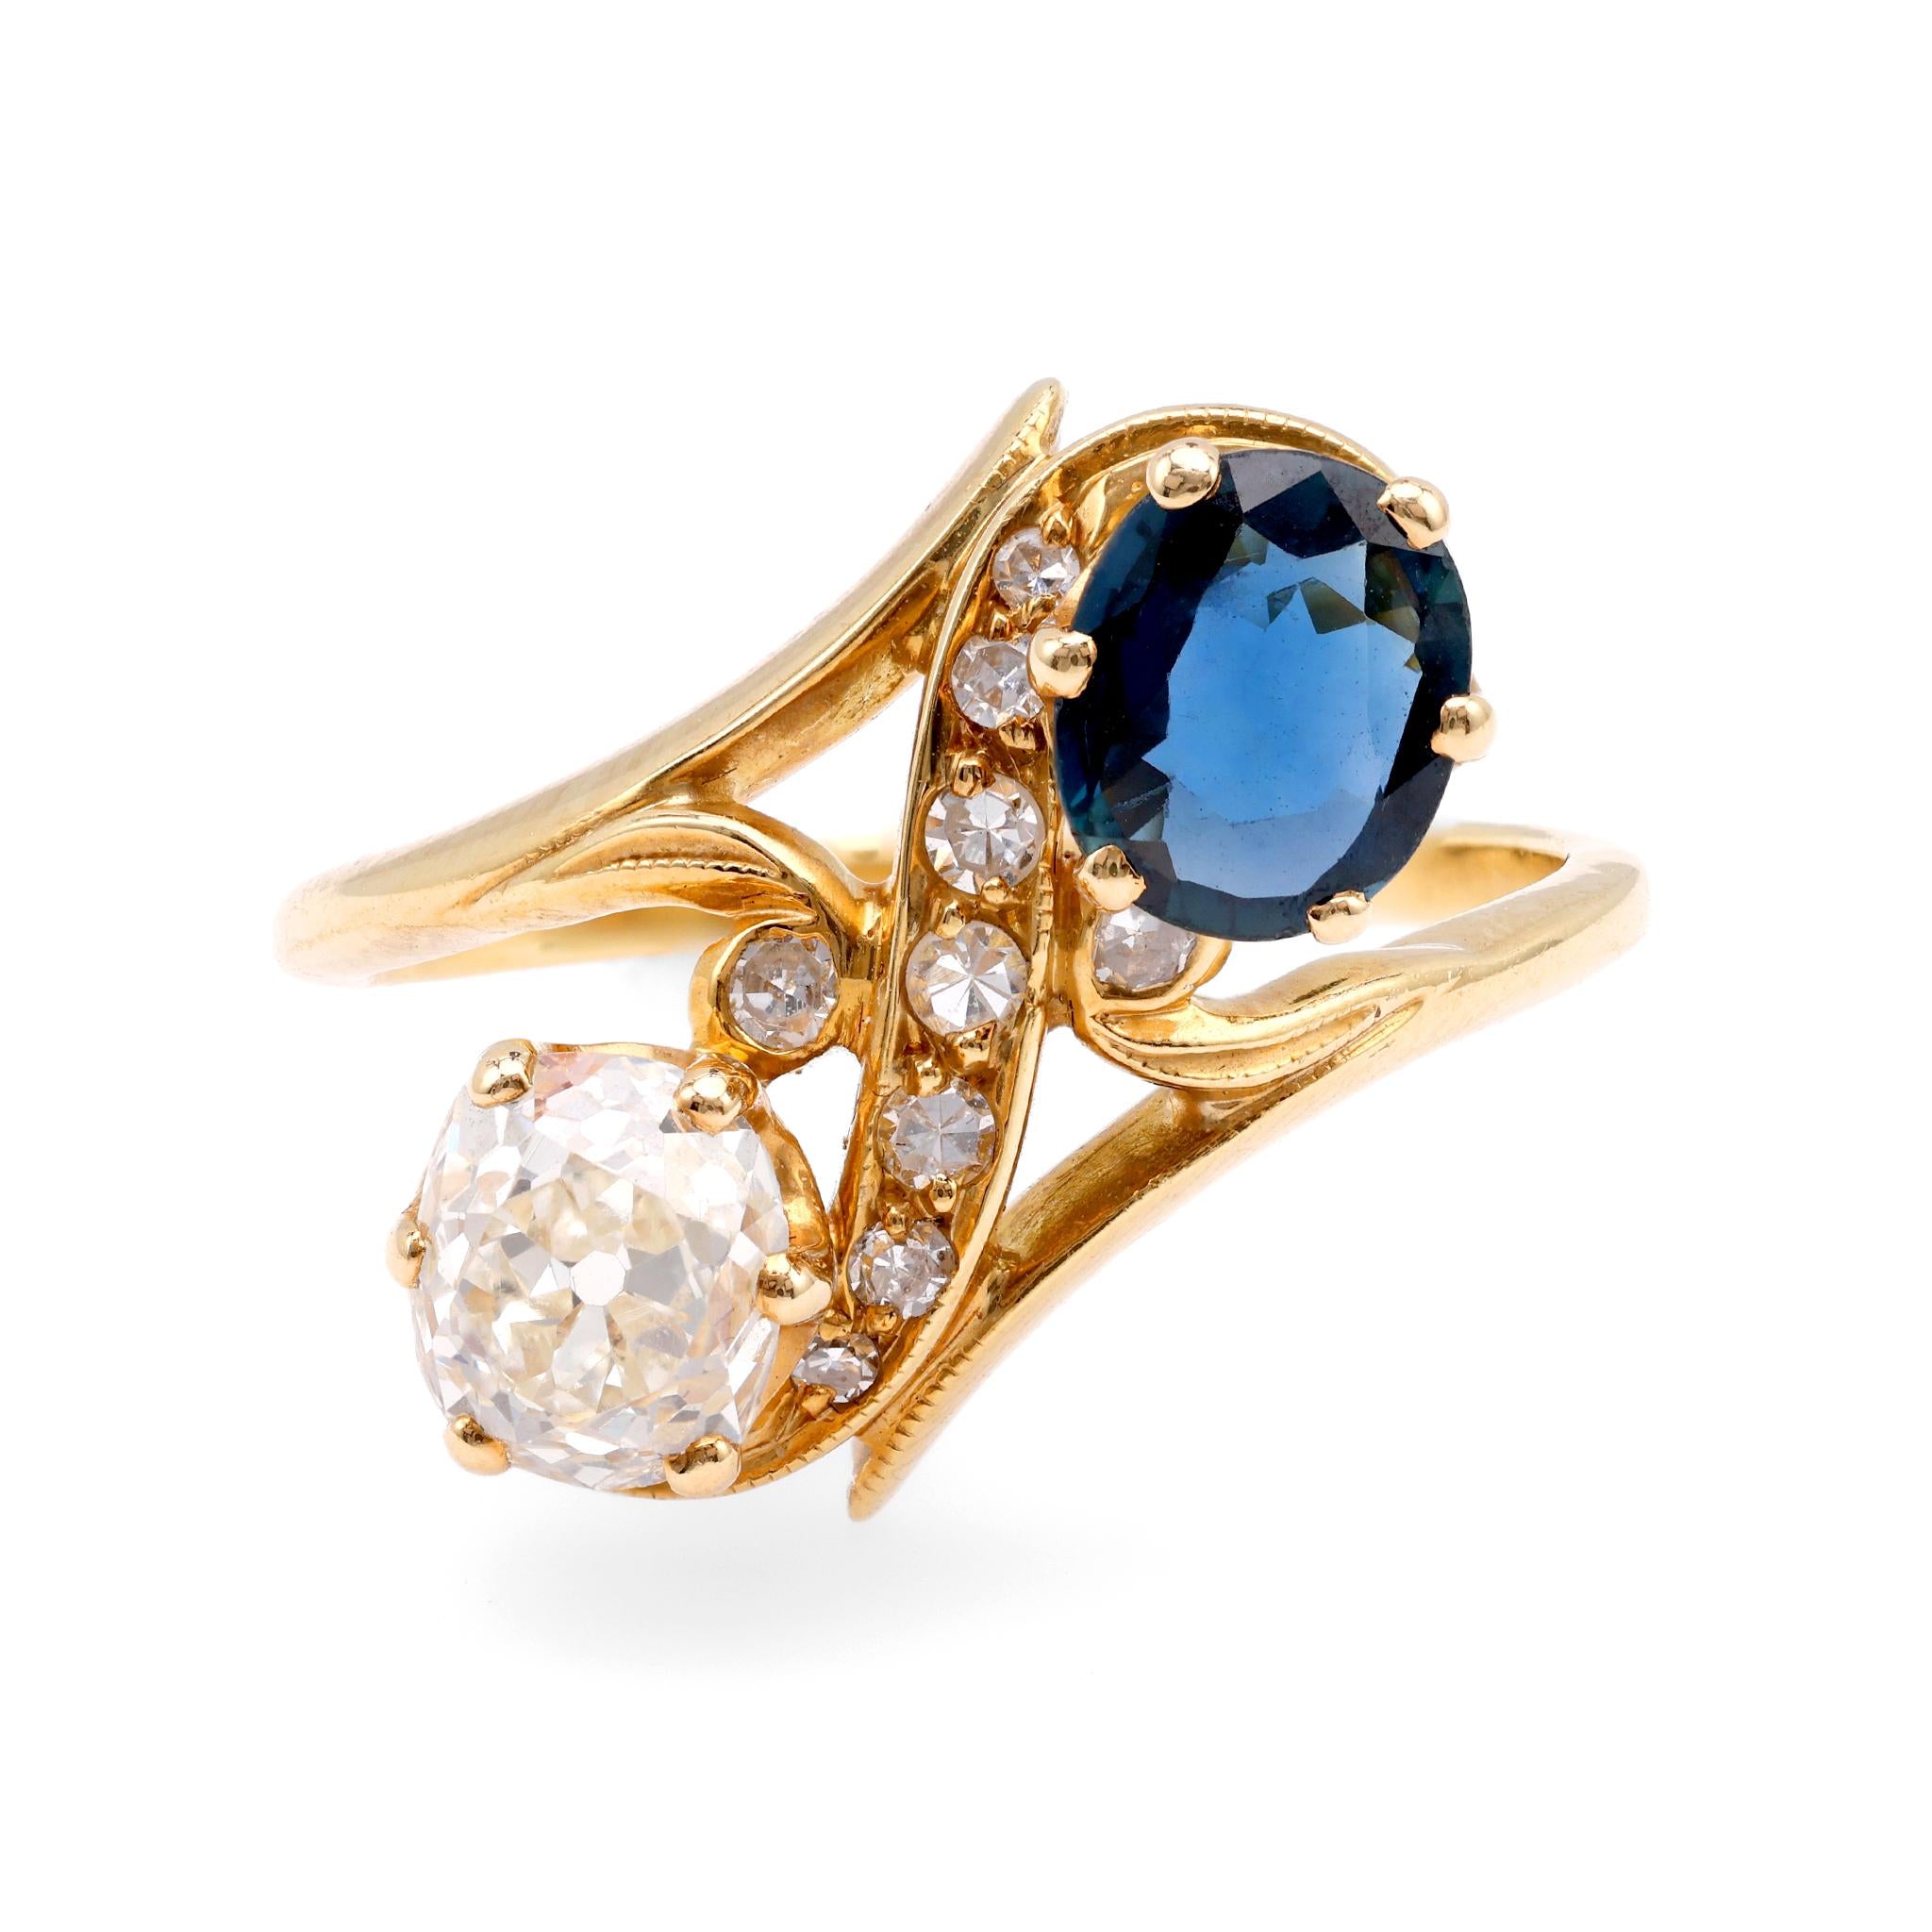 Belle Époque French Diamond and Sapphire 18k Yellow Gold Toi et Moi Ring  Jack Weir & Sons   